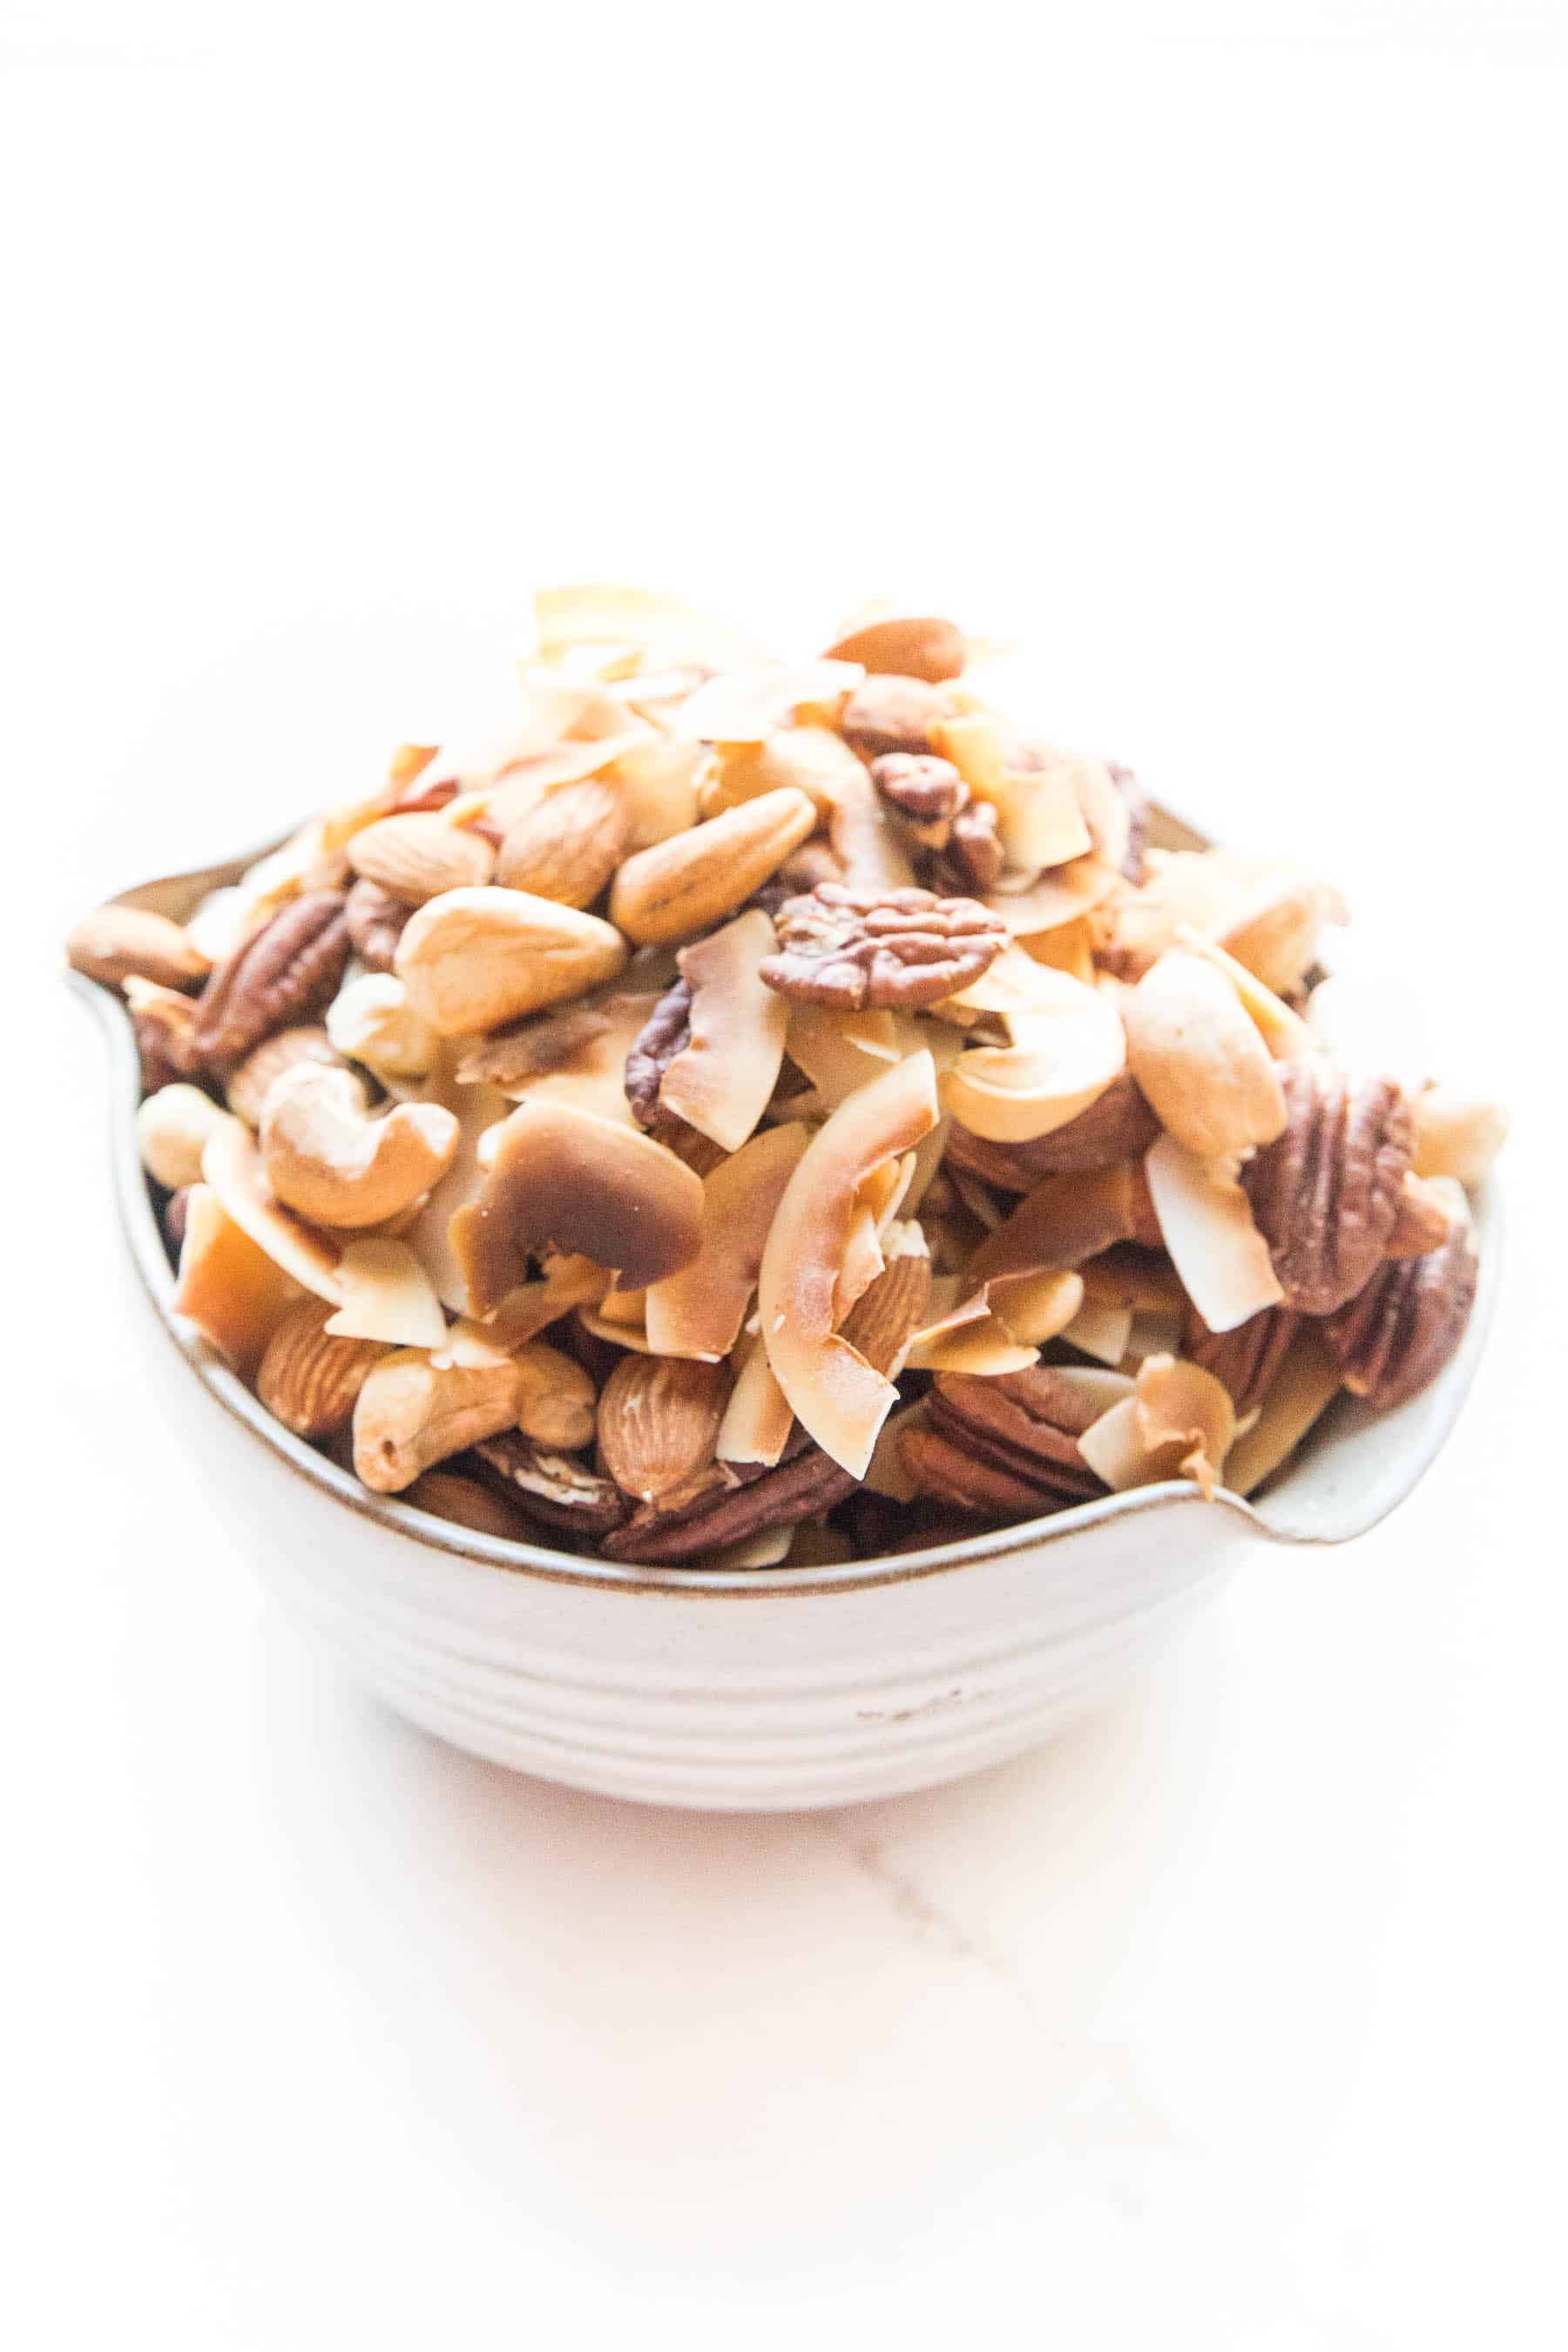 nuts and coconut chips trail mix in a bowl on white background